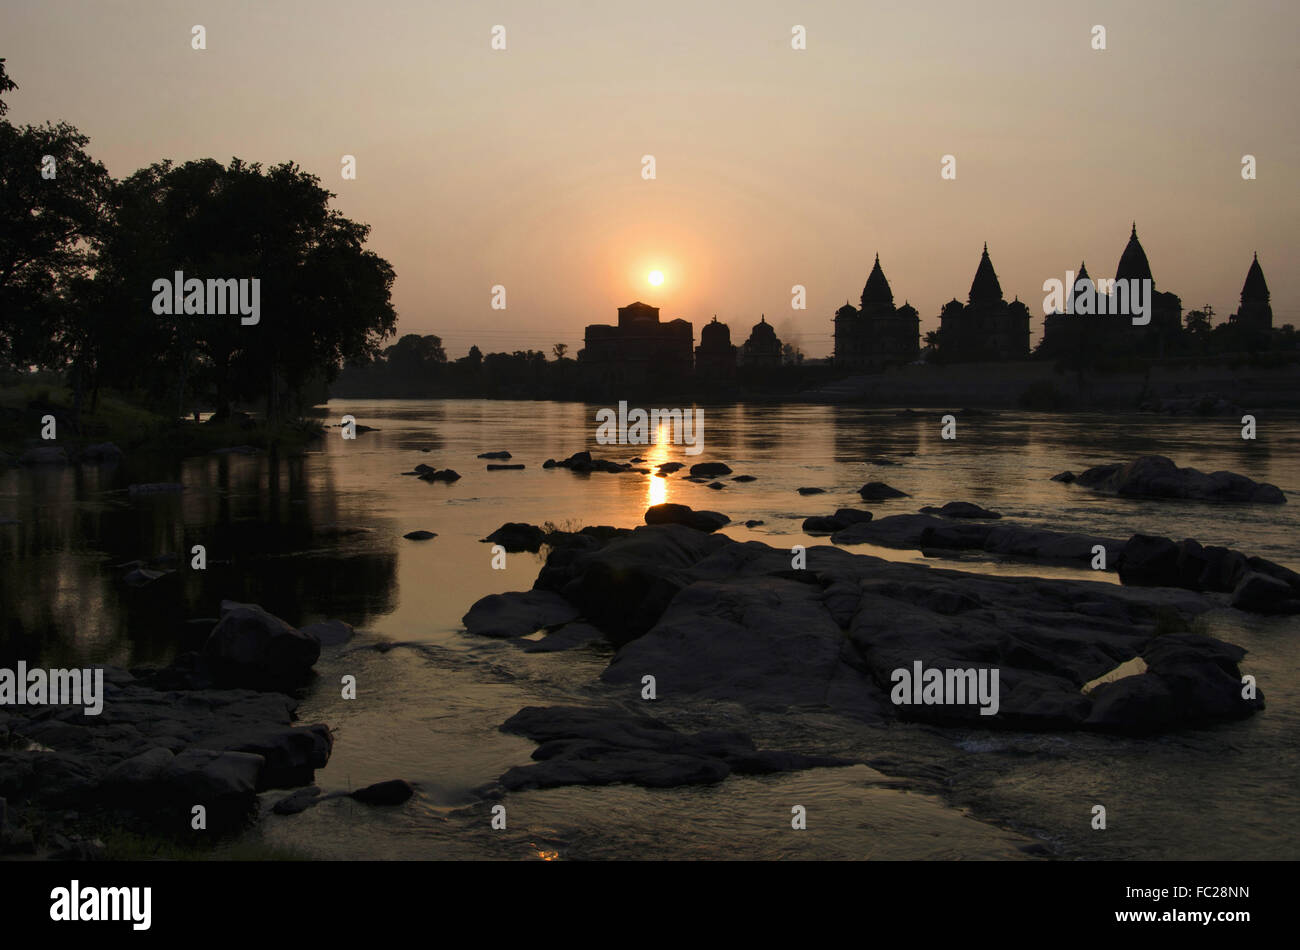 Sunset. silhouette of chatris on the bank of Betwa river at Orchha.Madhya Pradesh. India Stock Photo